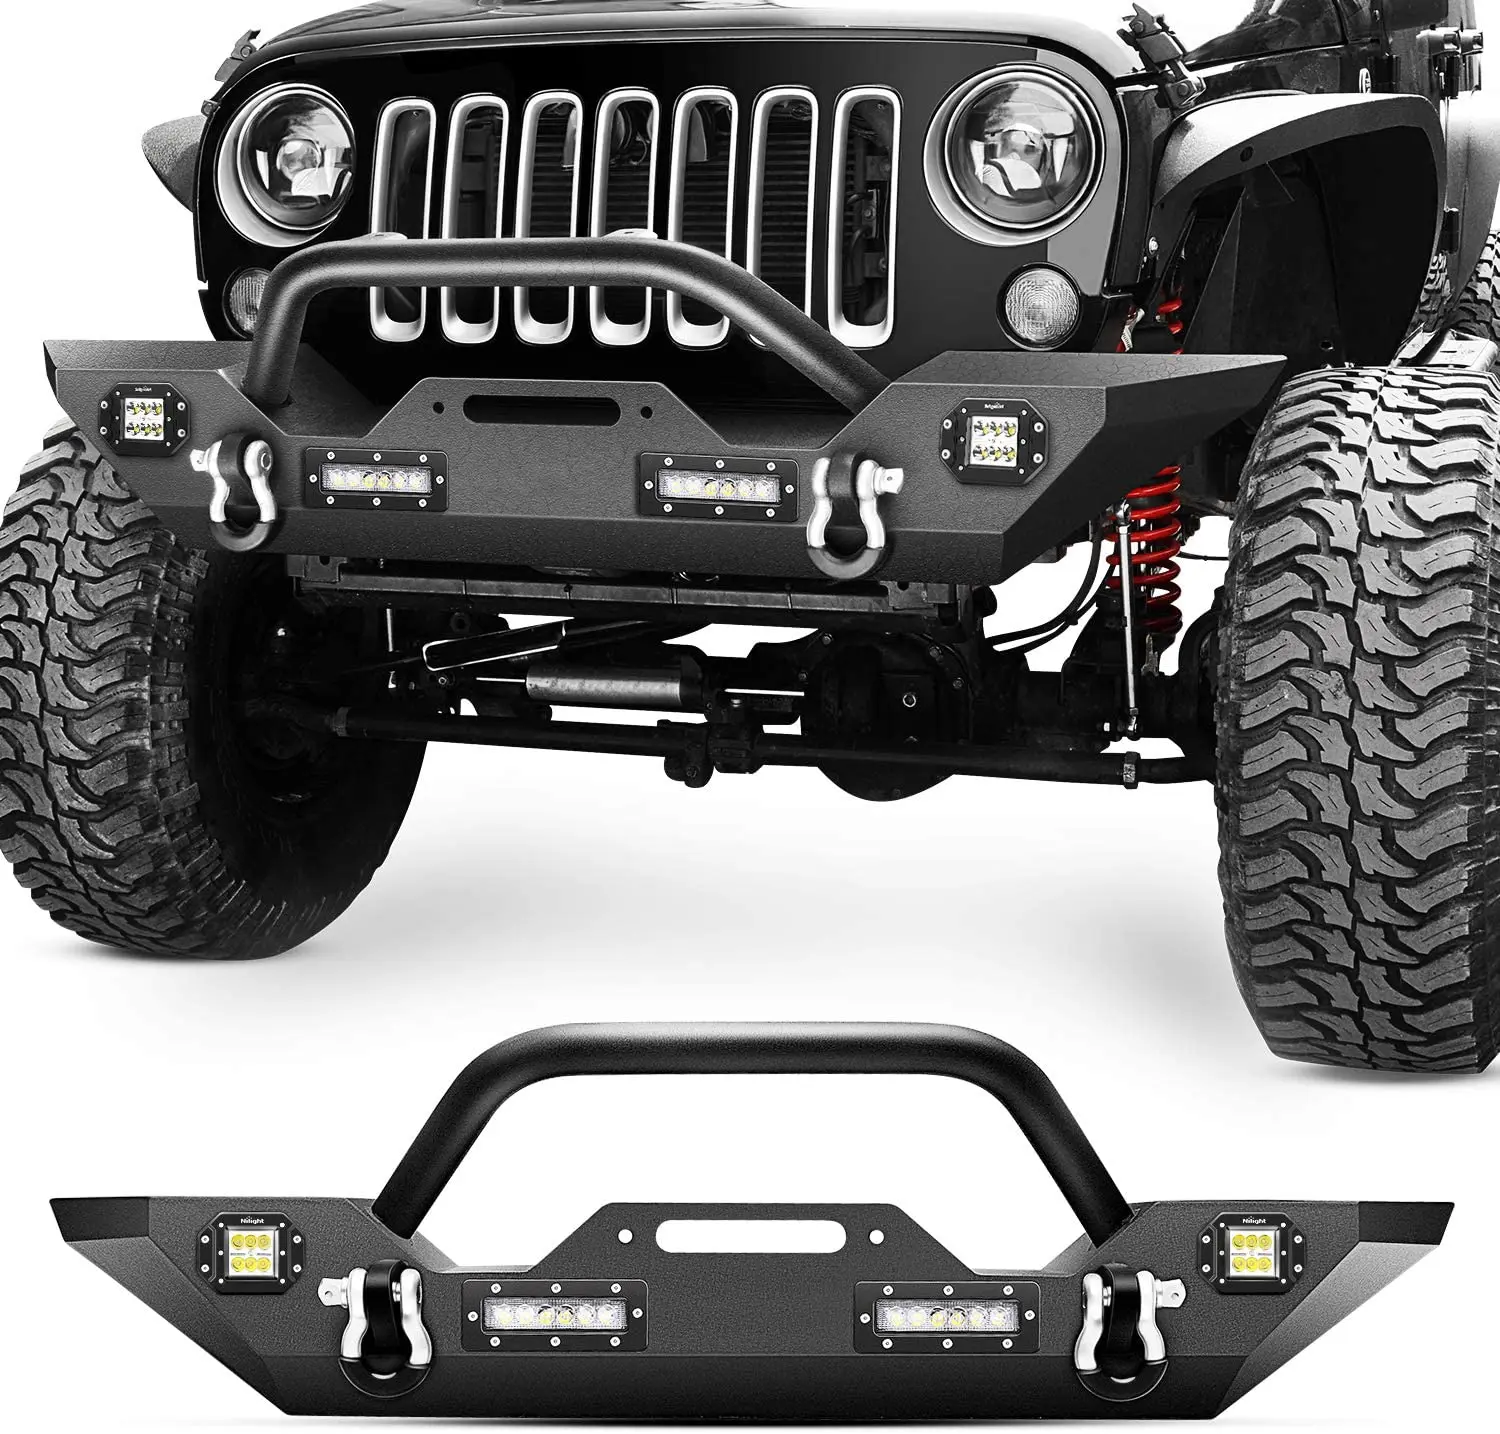 

Hebei Lan tian High Quality And Cheap Front Bumper For Je ep Wrang ler 05+